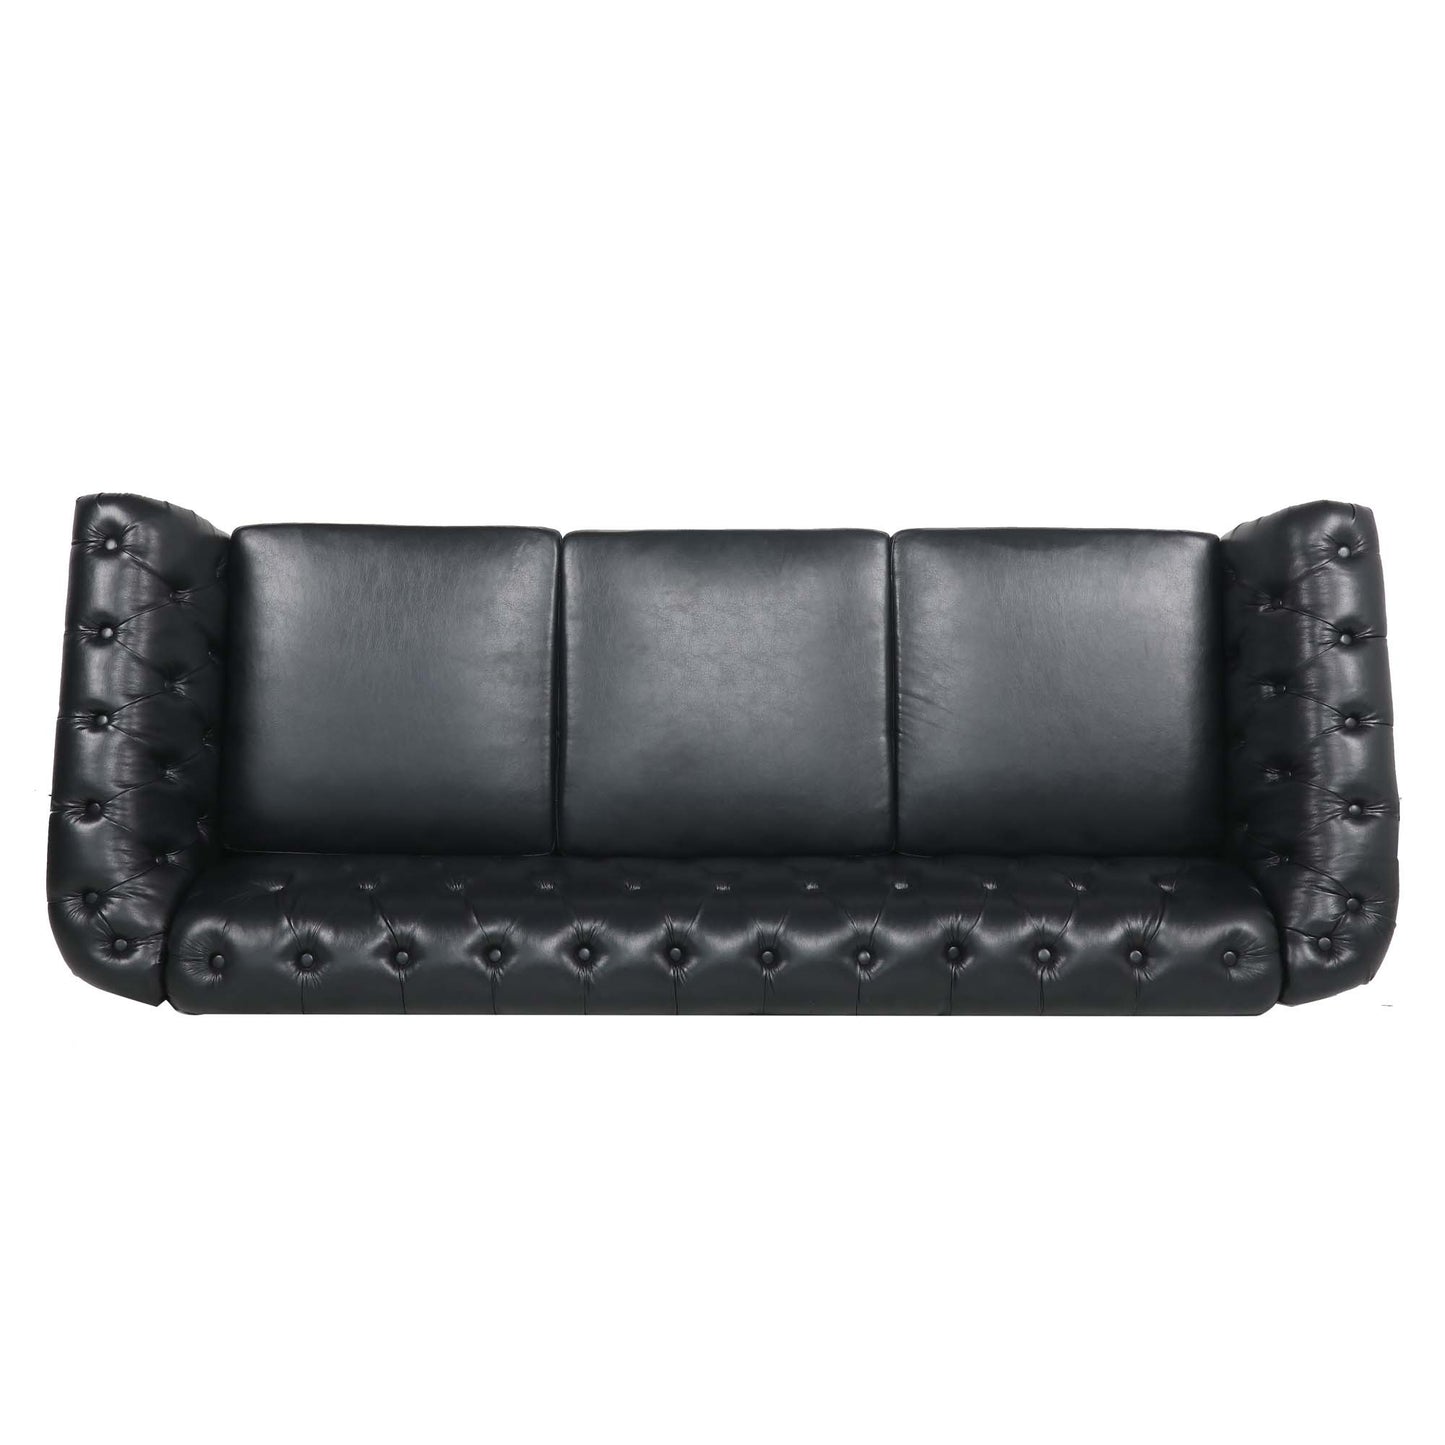 Chesterfield Three Seater Sofa in Black Leather